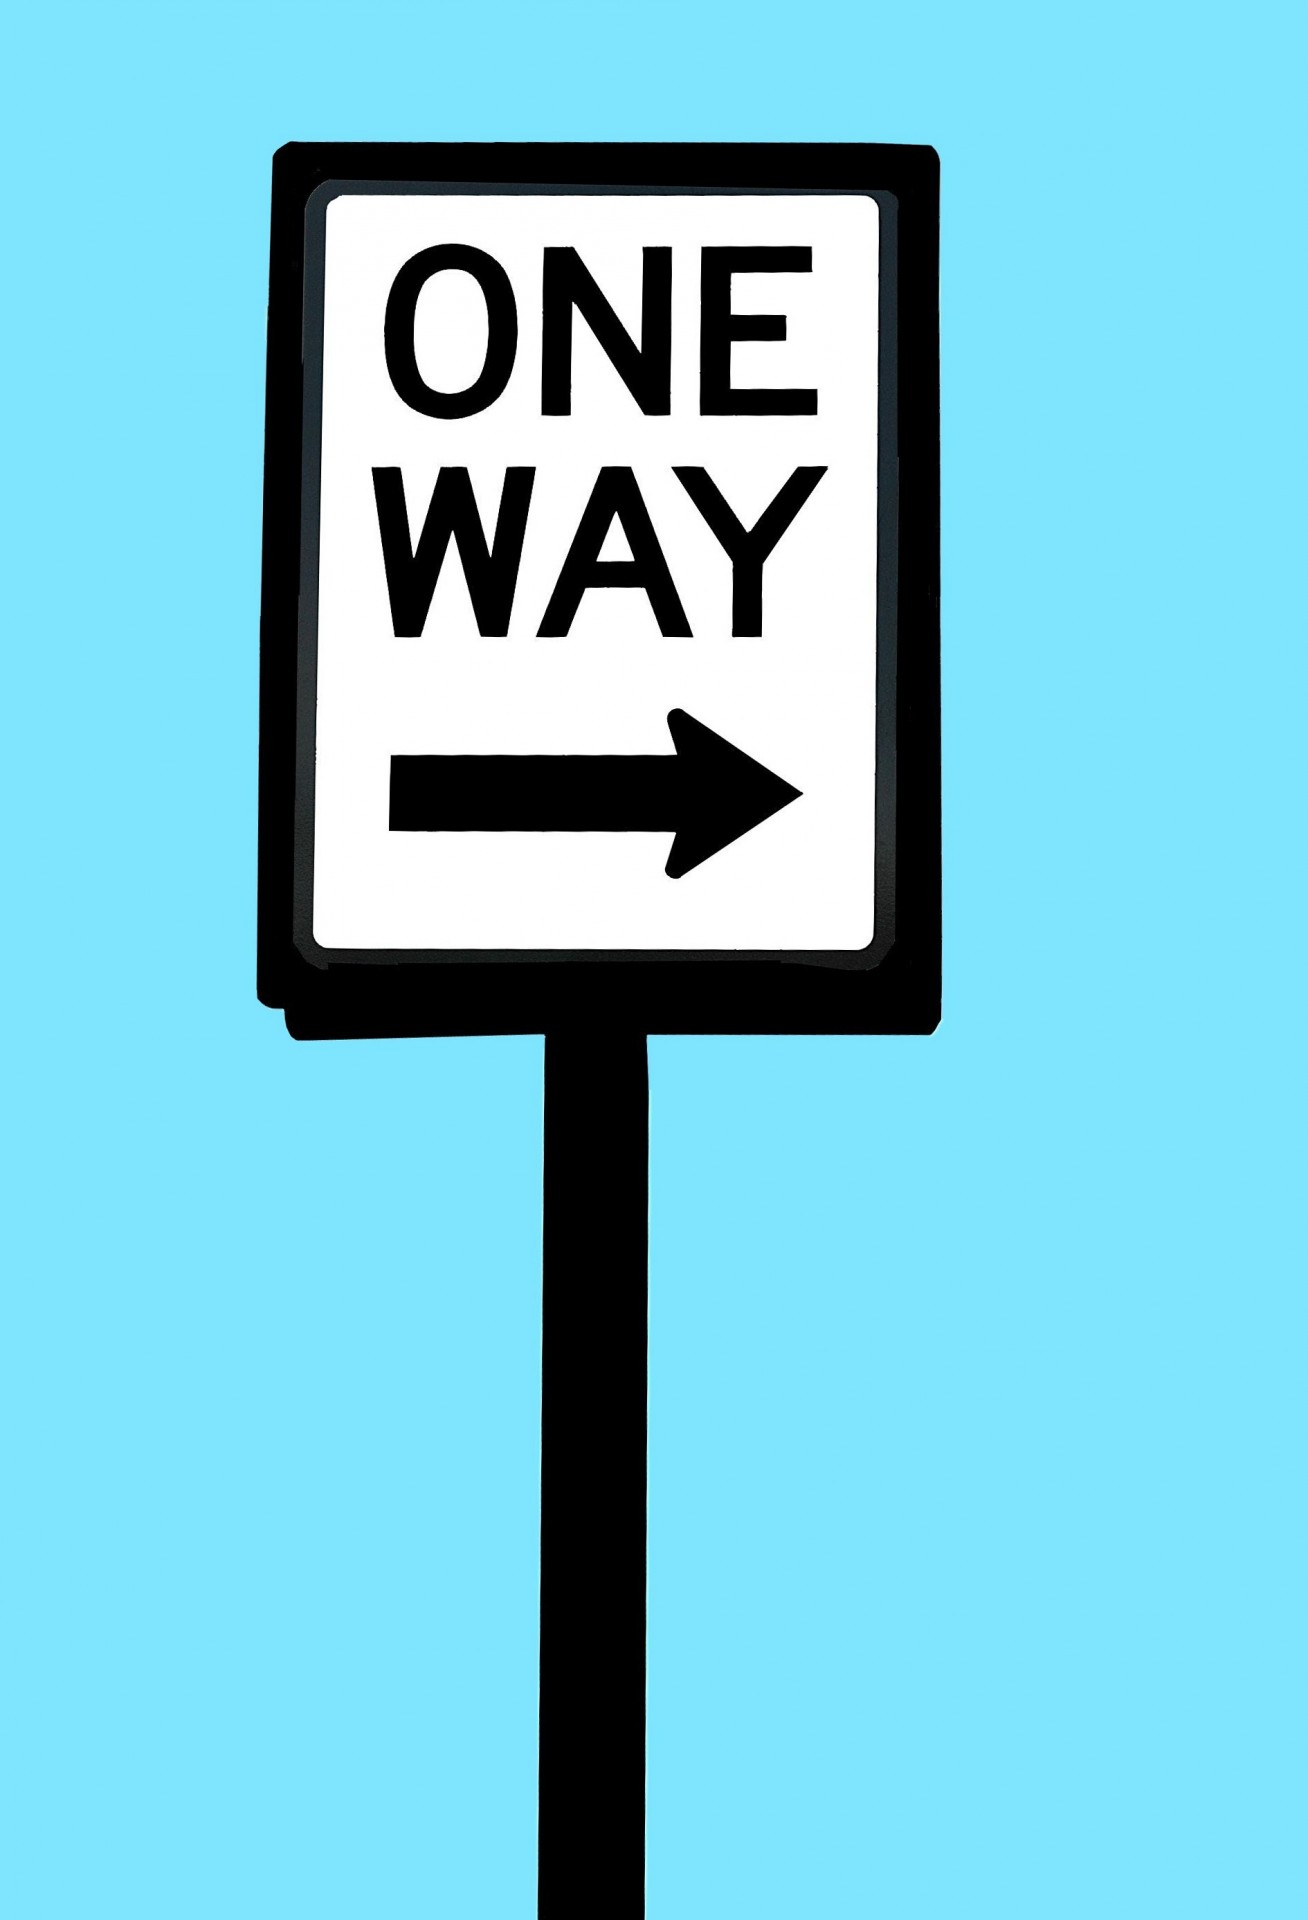 One Way Sign